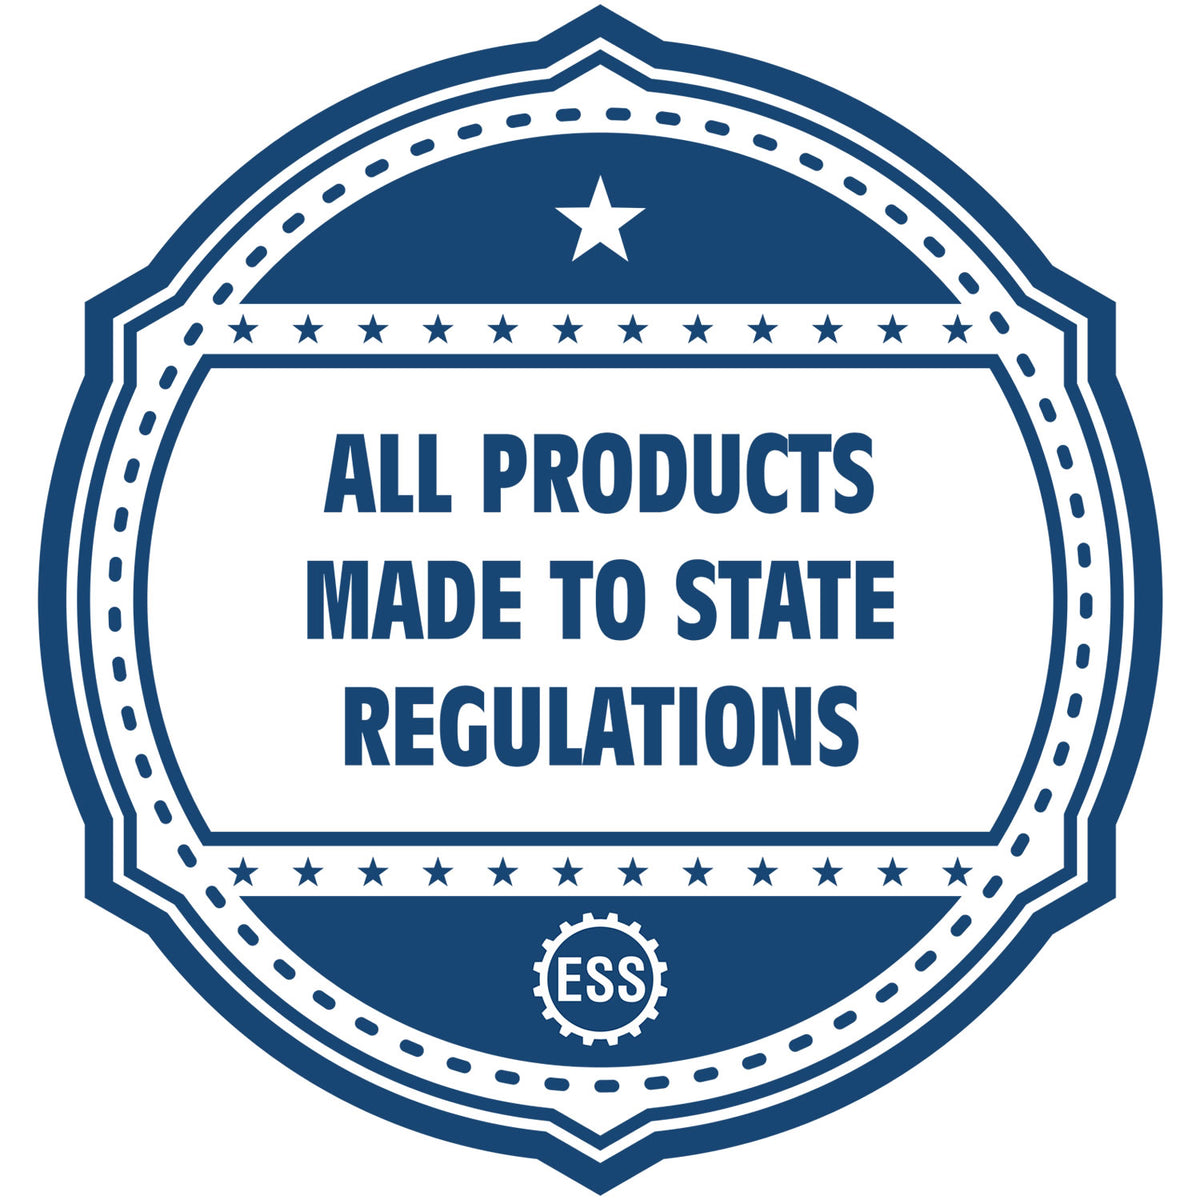 A blue icon or badge for the Gift Mississippi Engineer Seal showing that this product is made in compliance with state regulations.